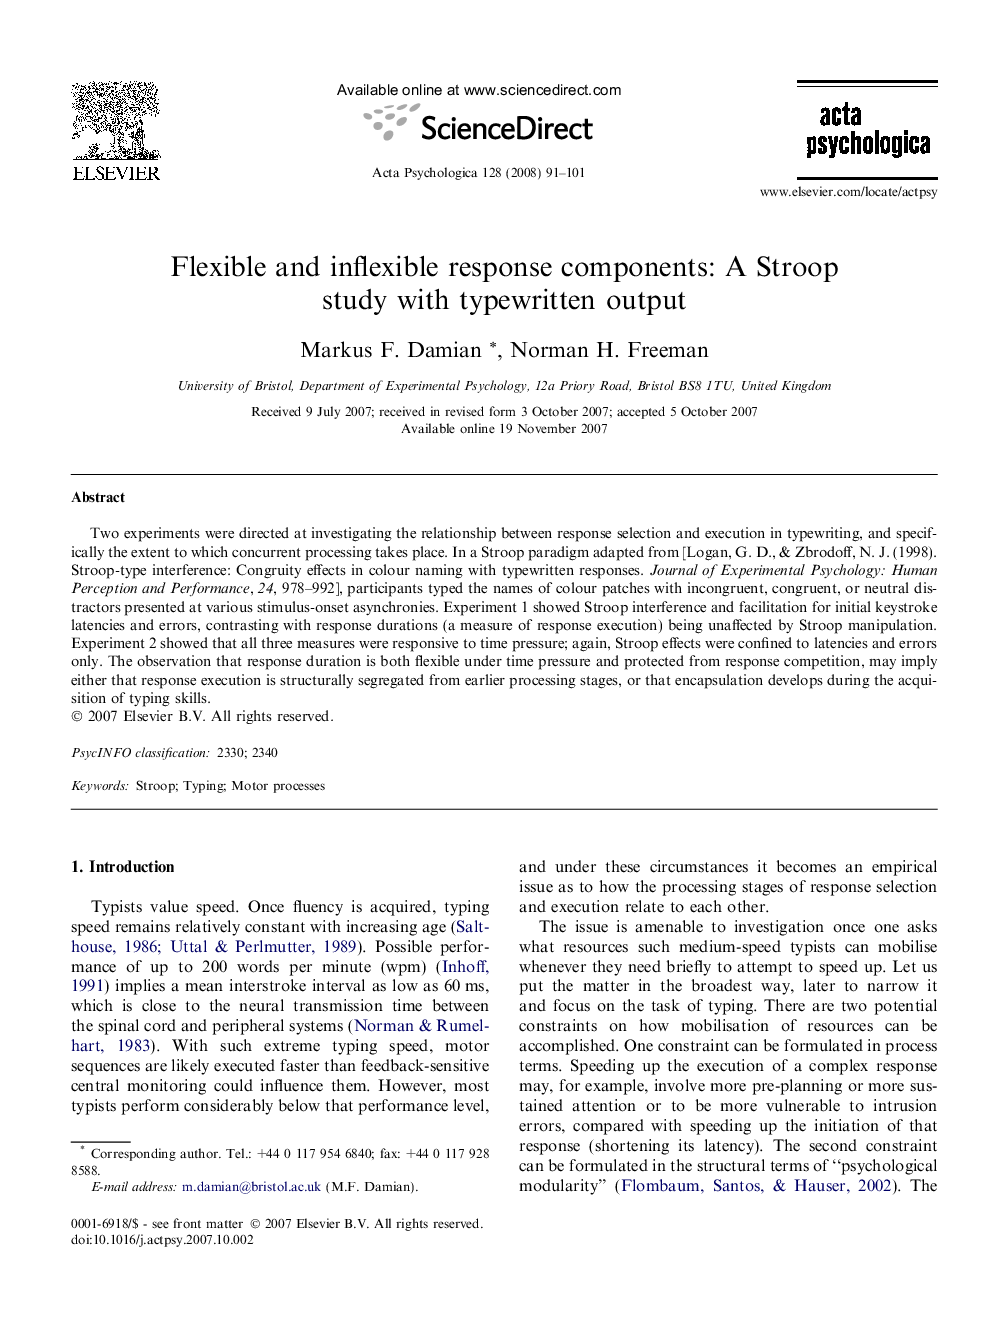 Flexible and inflexible response components: A Stroop study with typewritten output